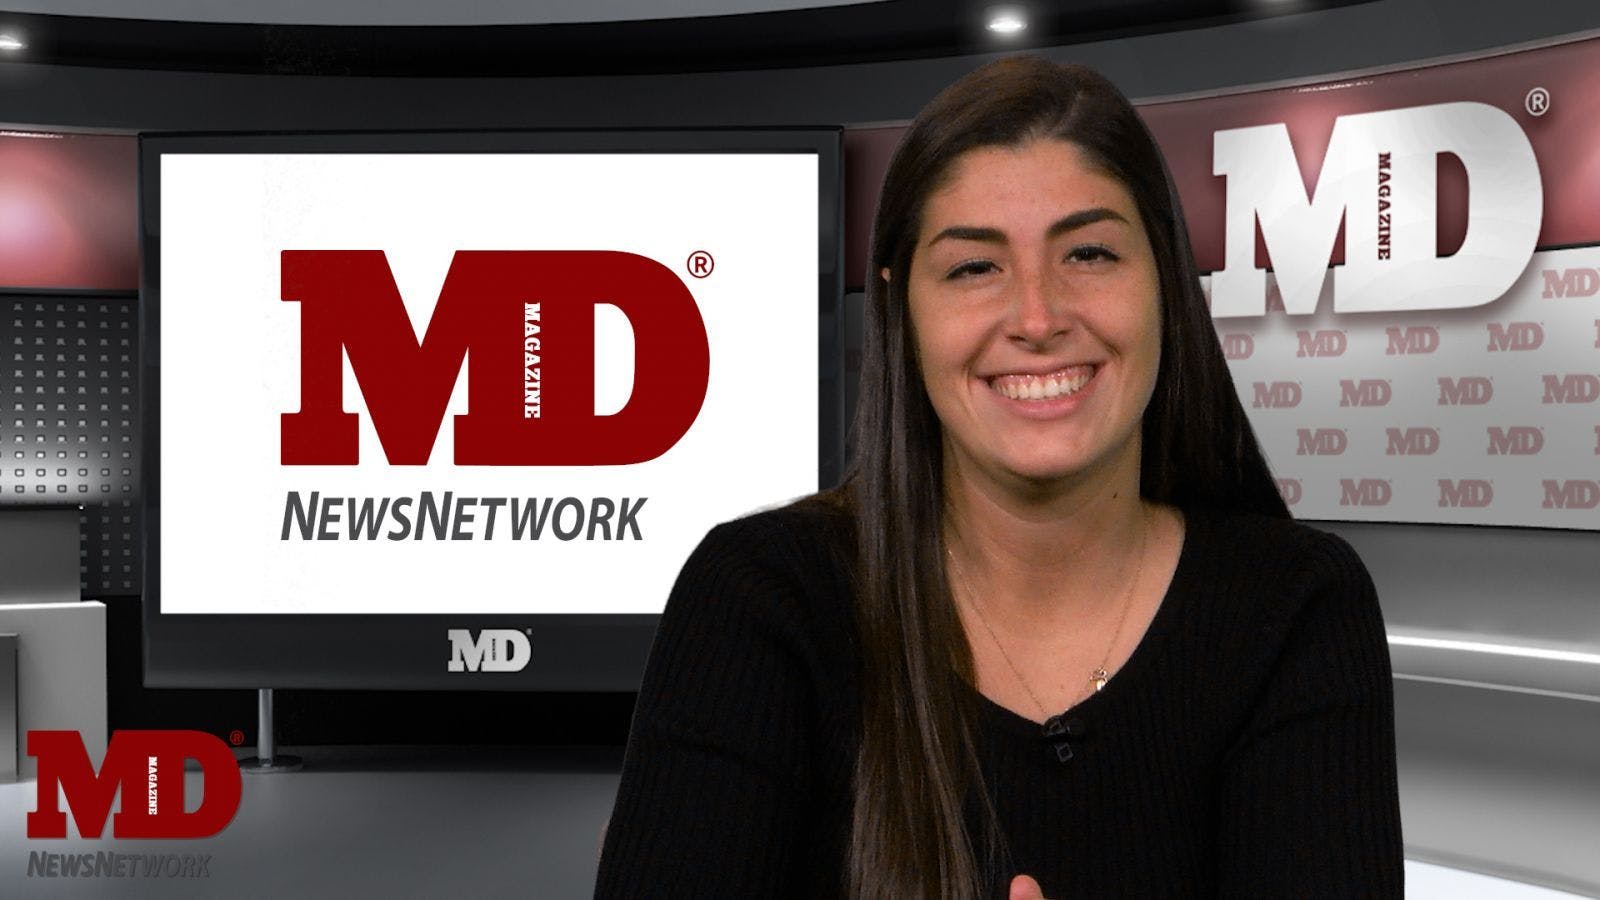 MDNN: PTSD From Cancer, HCV/HIV Co-infection Care, C. difficile From Antibiotics, and Juluca's Approval